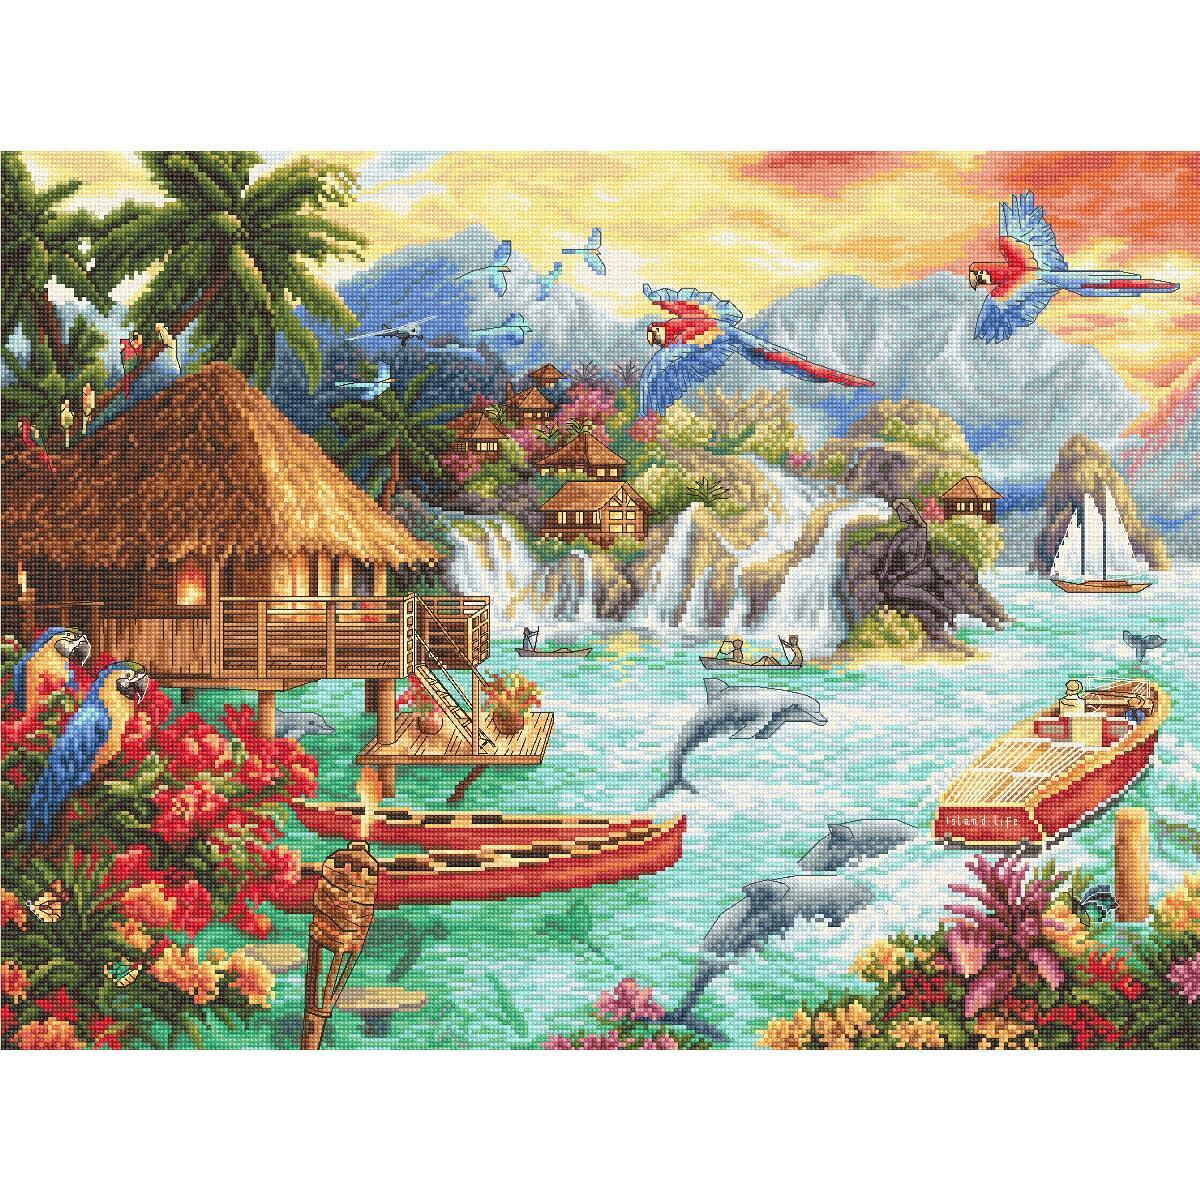 A tropical paradise scene with a thatched hut on stilts...